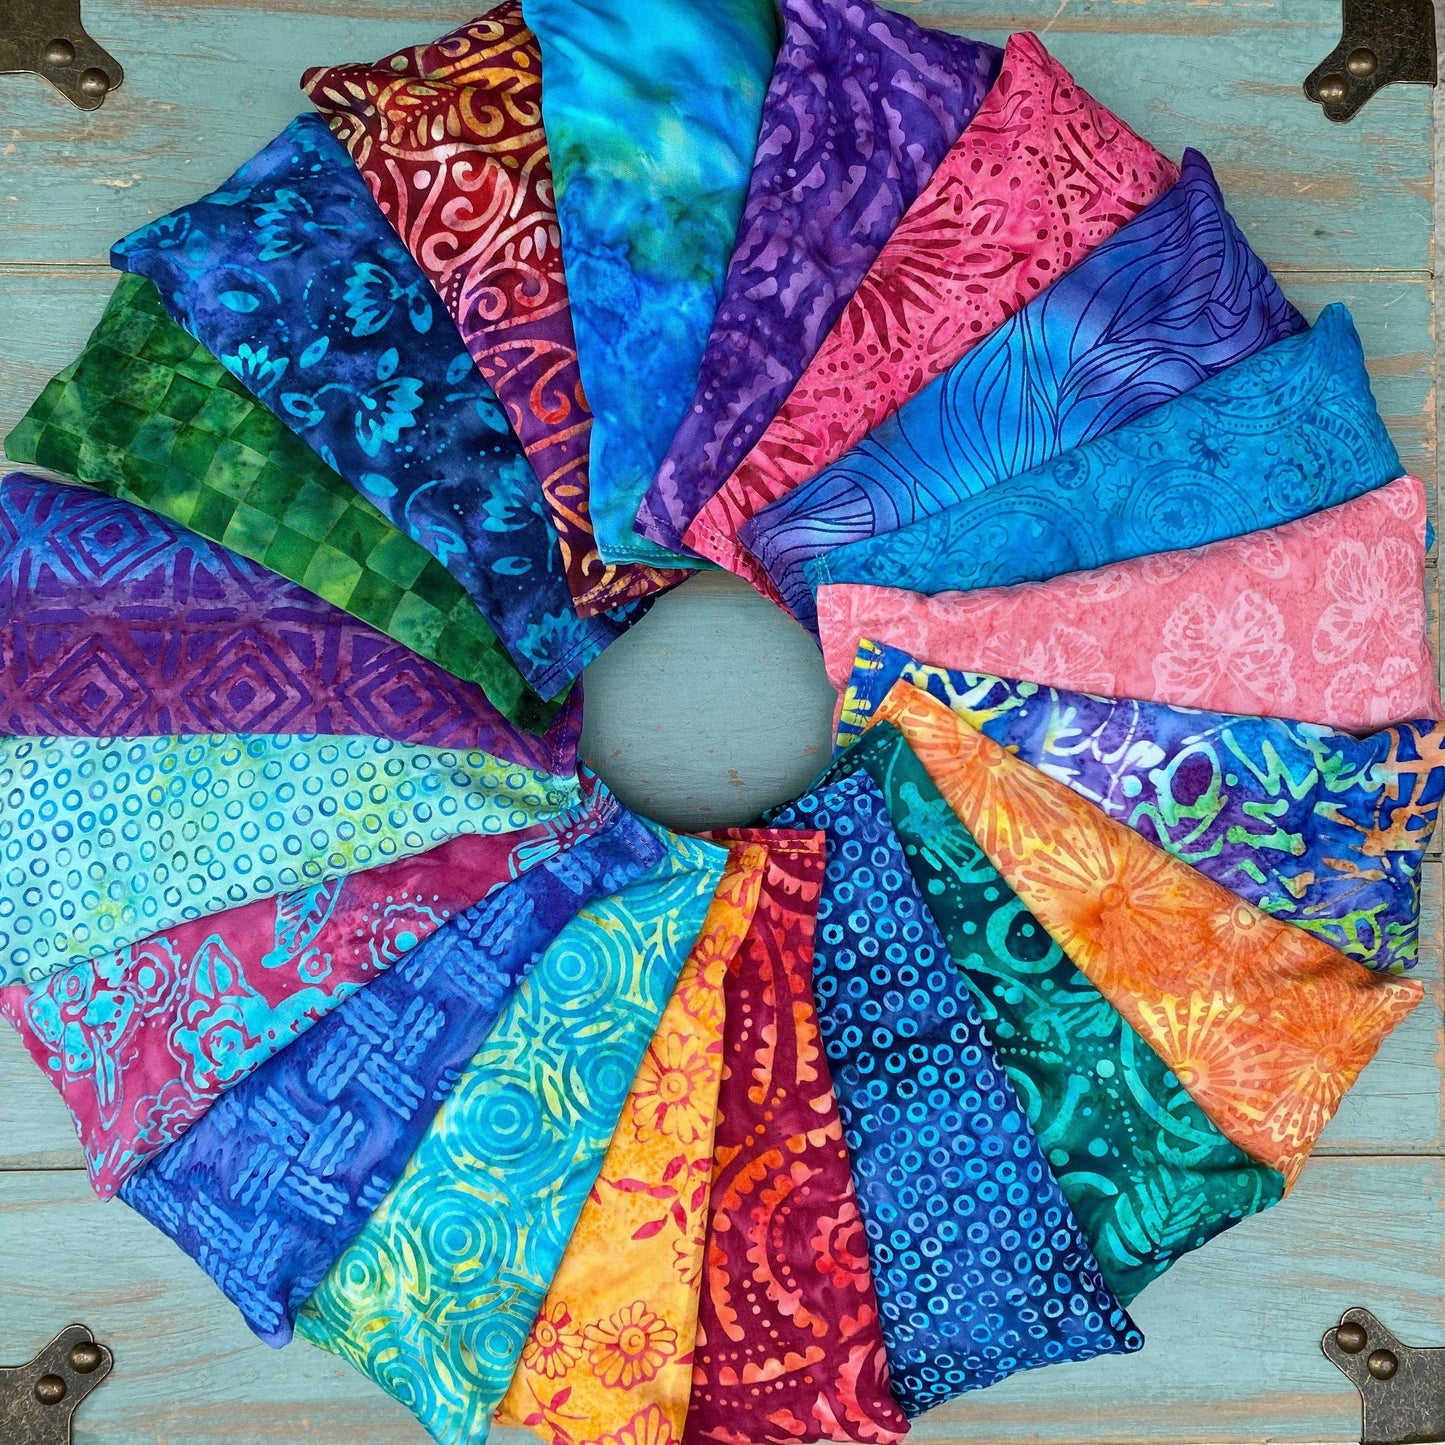 40 Hand-Dyed Batik Flax Eye Pillows with Optional Covers